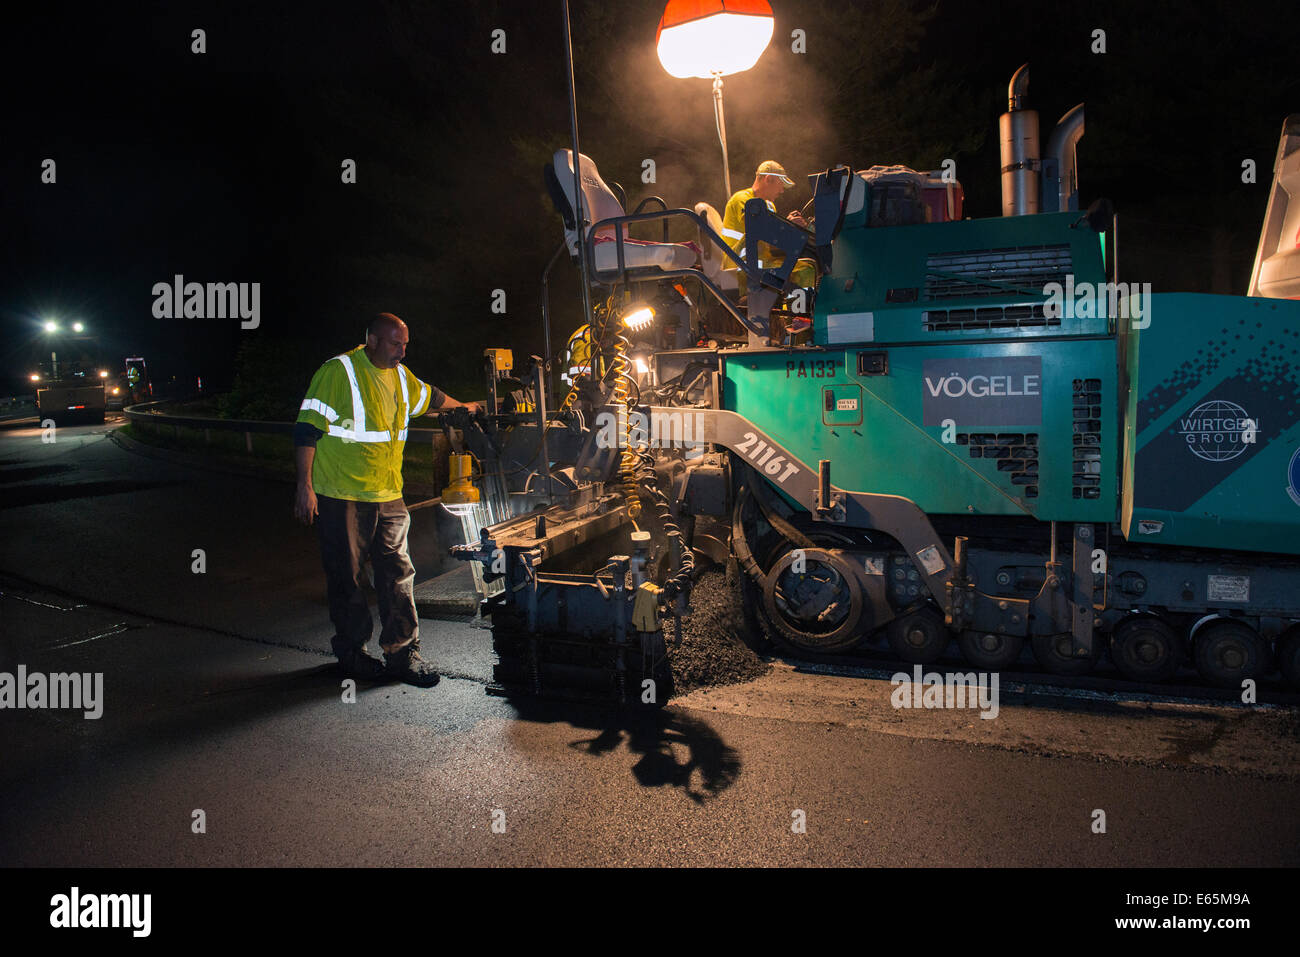 Waters Construction works on nighttime paving on the Merritt Parkway in Connecticut with tracked paving machine made by Vogele. Stock Photo